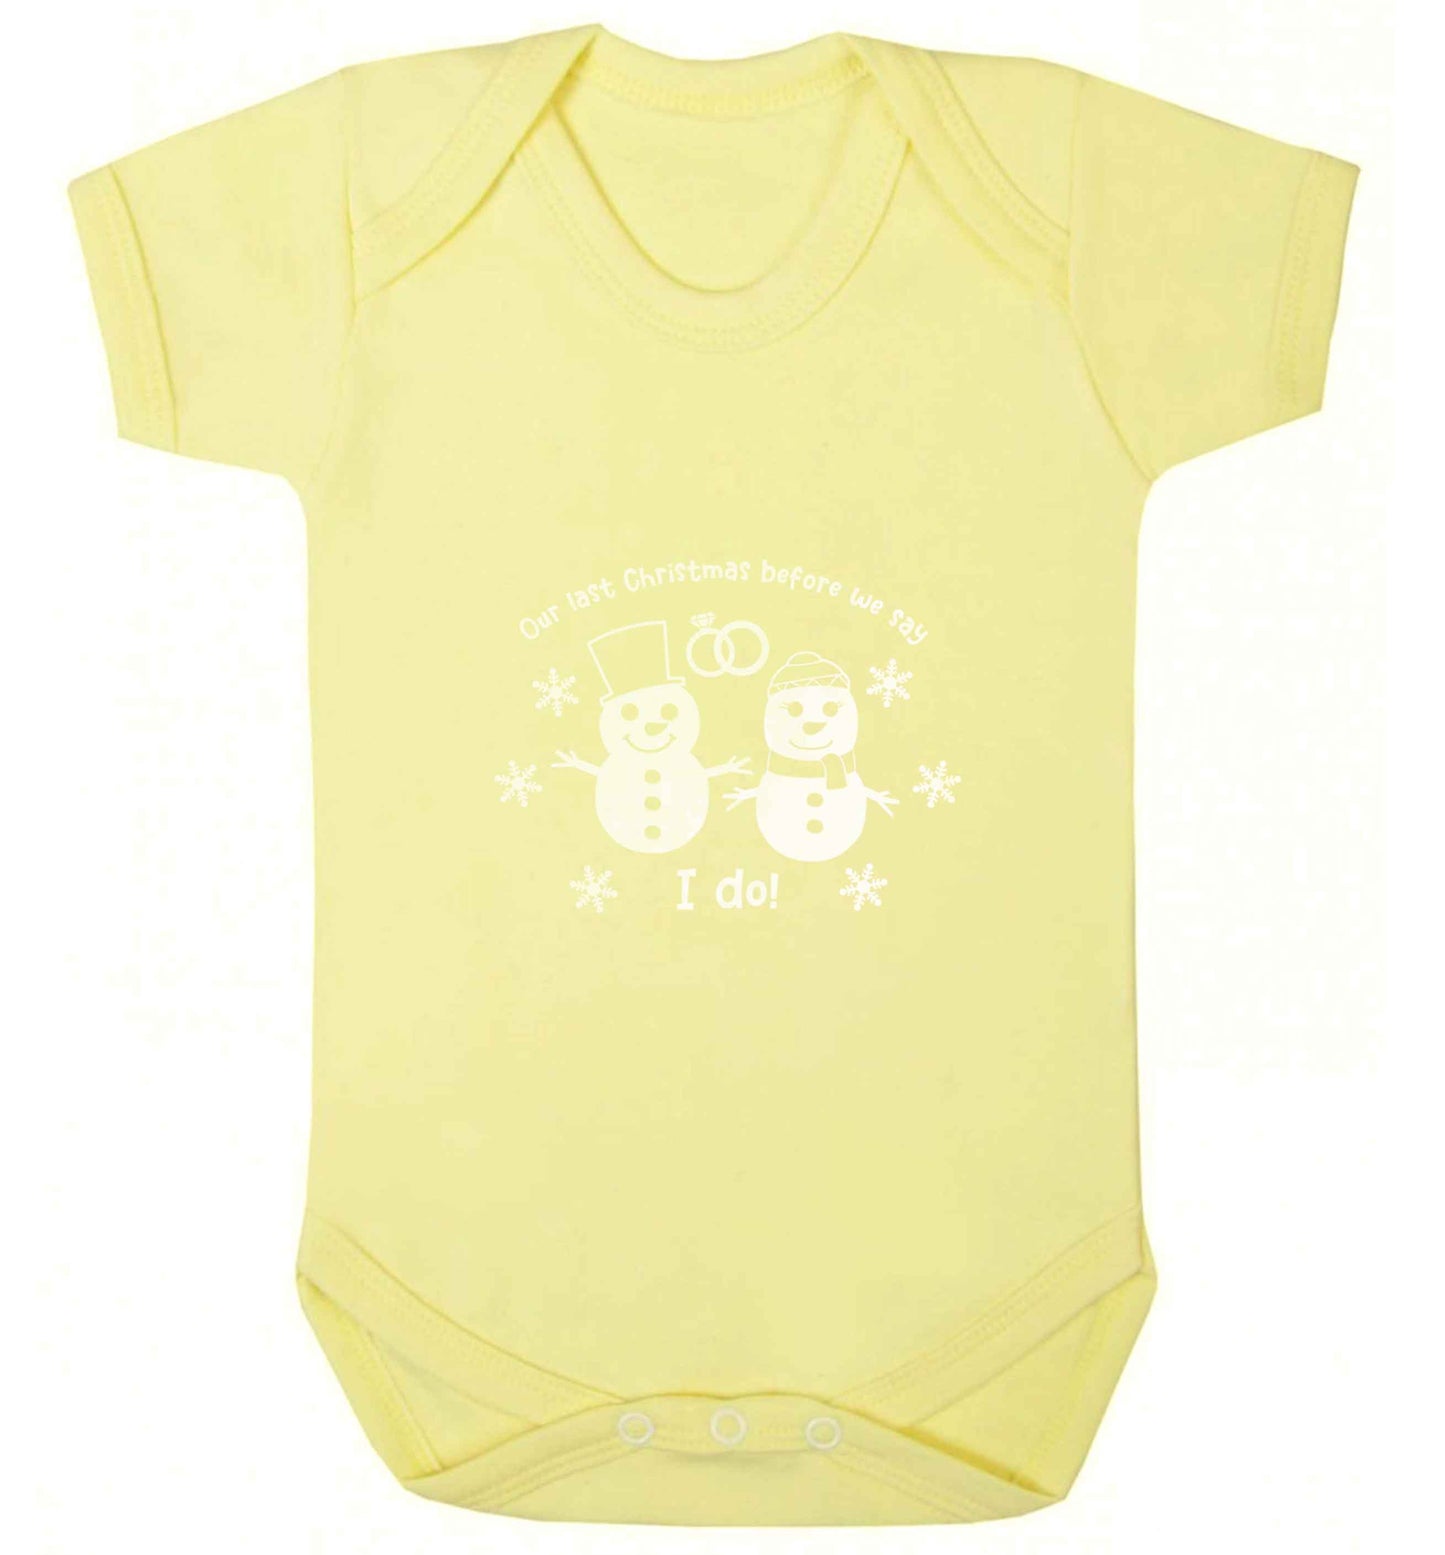 Last Christmas before we say I do baby vest pale yellow 18-24 months